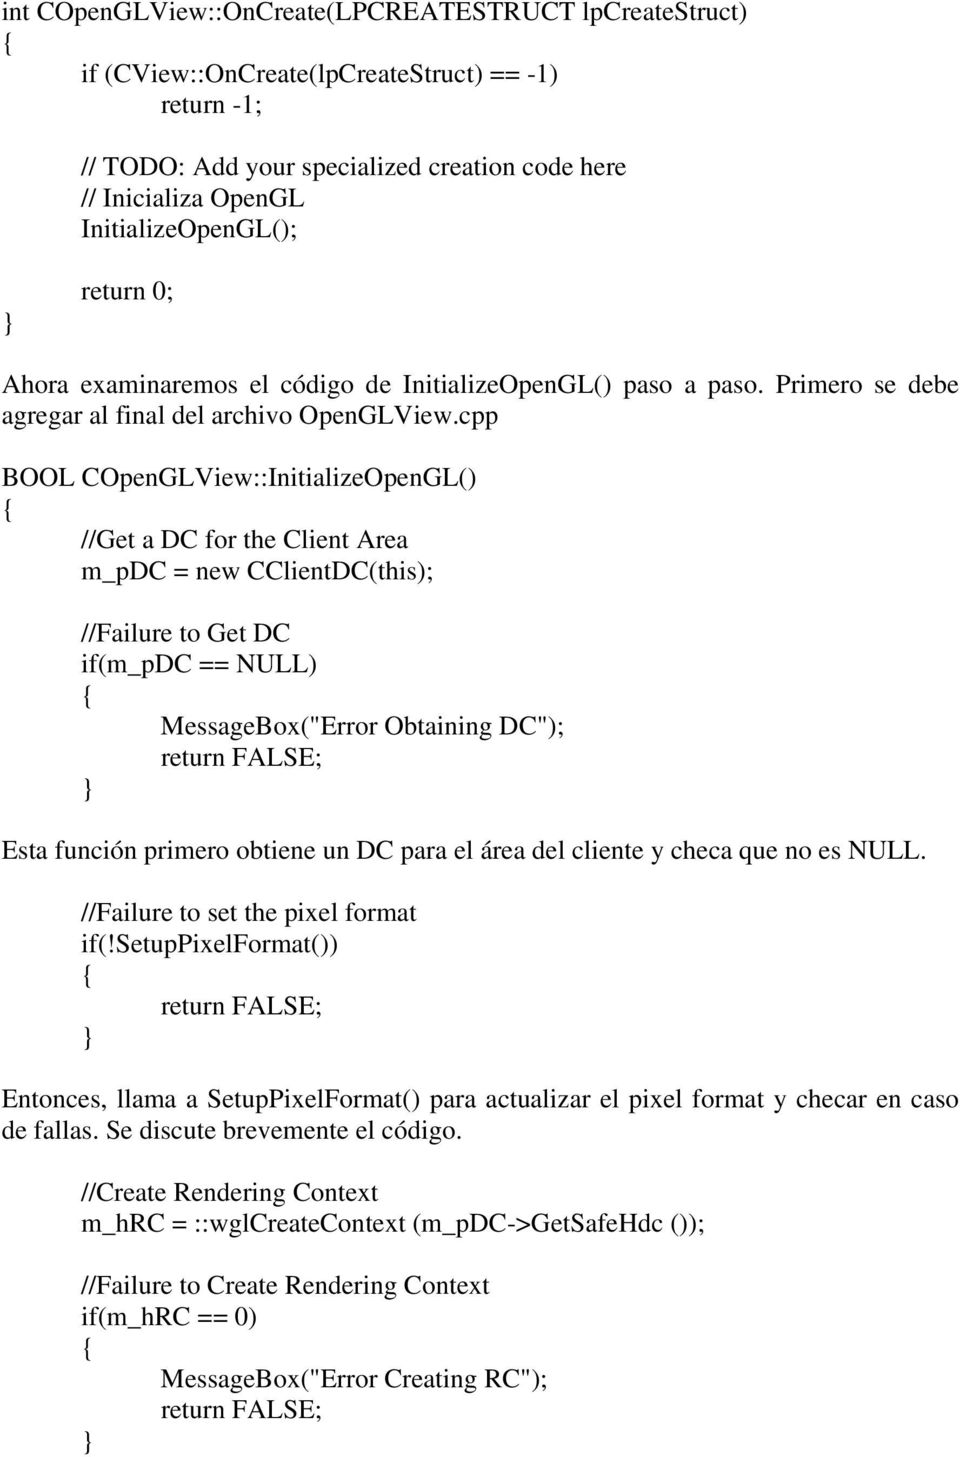 cpp BOOL COpenGLView::InitializeOpenGL() //Get a DC for the Client Area m_pdc = new CClientDC(this); //Failure to Get DC if(m_pdc == NULL) MessageBox("Error Obtaining DC"); Esta función primero